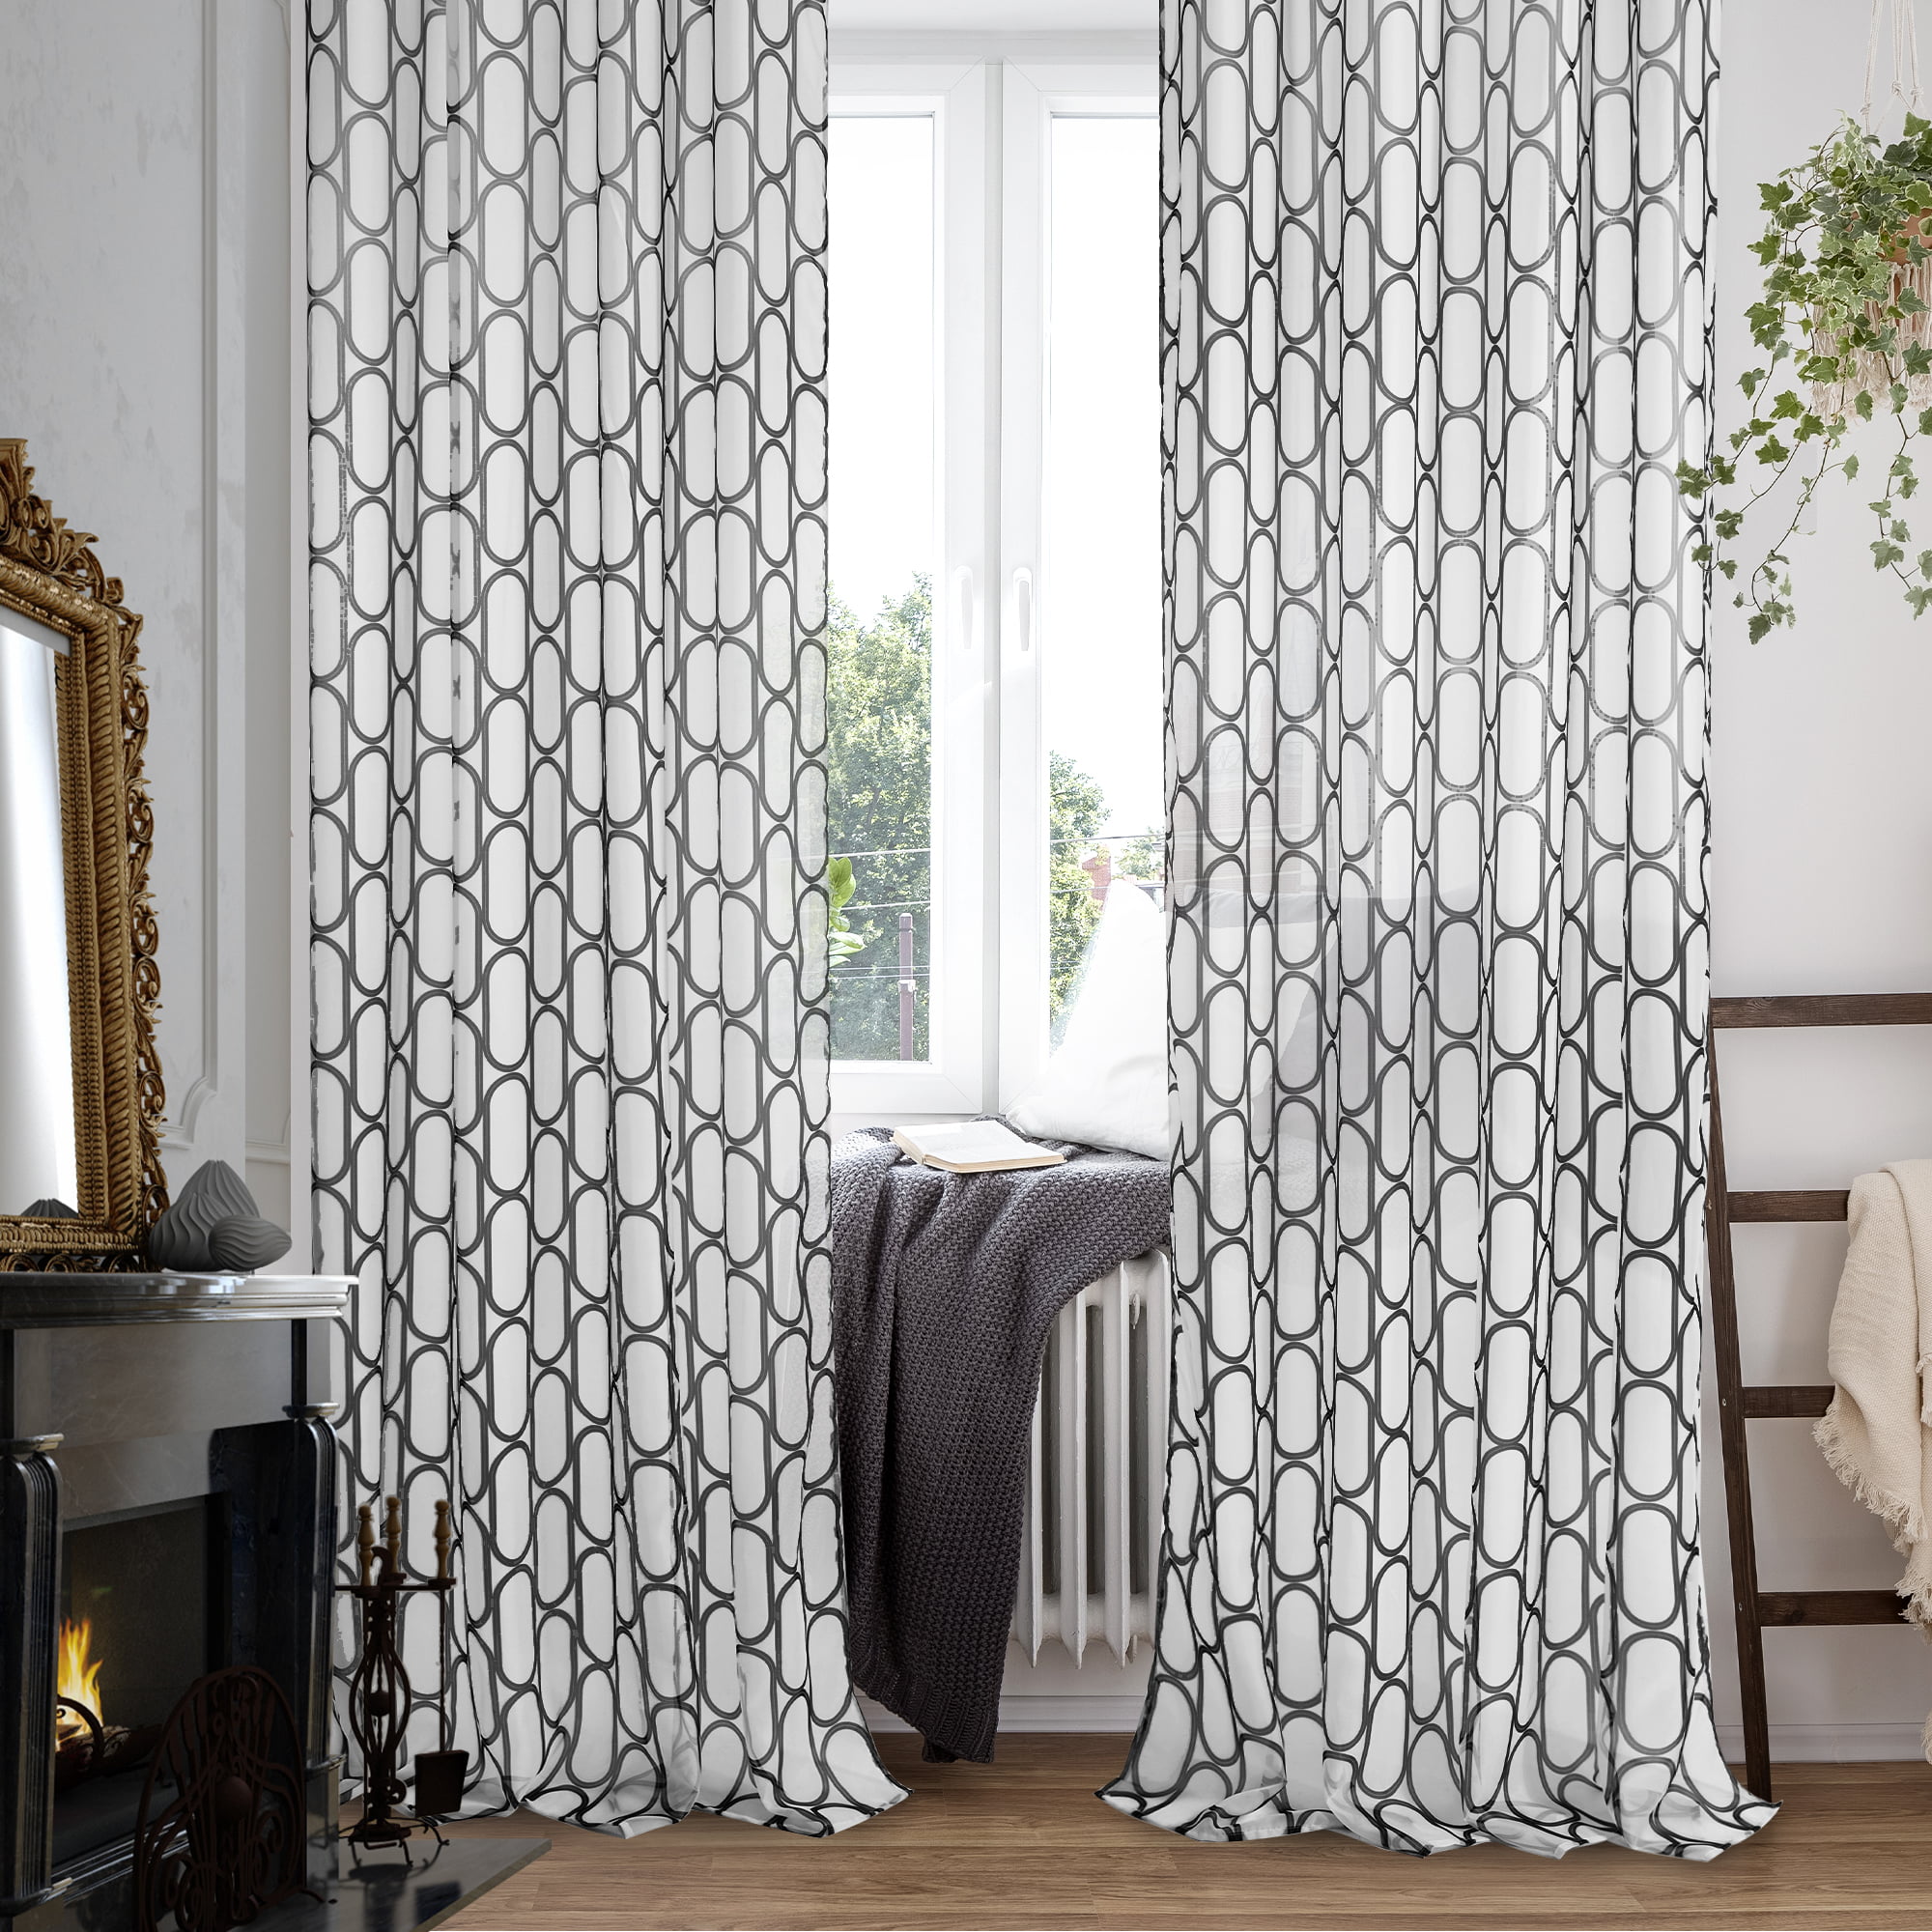 Deconovo Classic White Sheer Curtains Grommet Voile Drapes with Black  Geometric Pattern for Living Room Bedroom 52x63 inch 2 Panels 